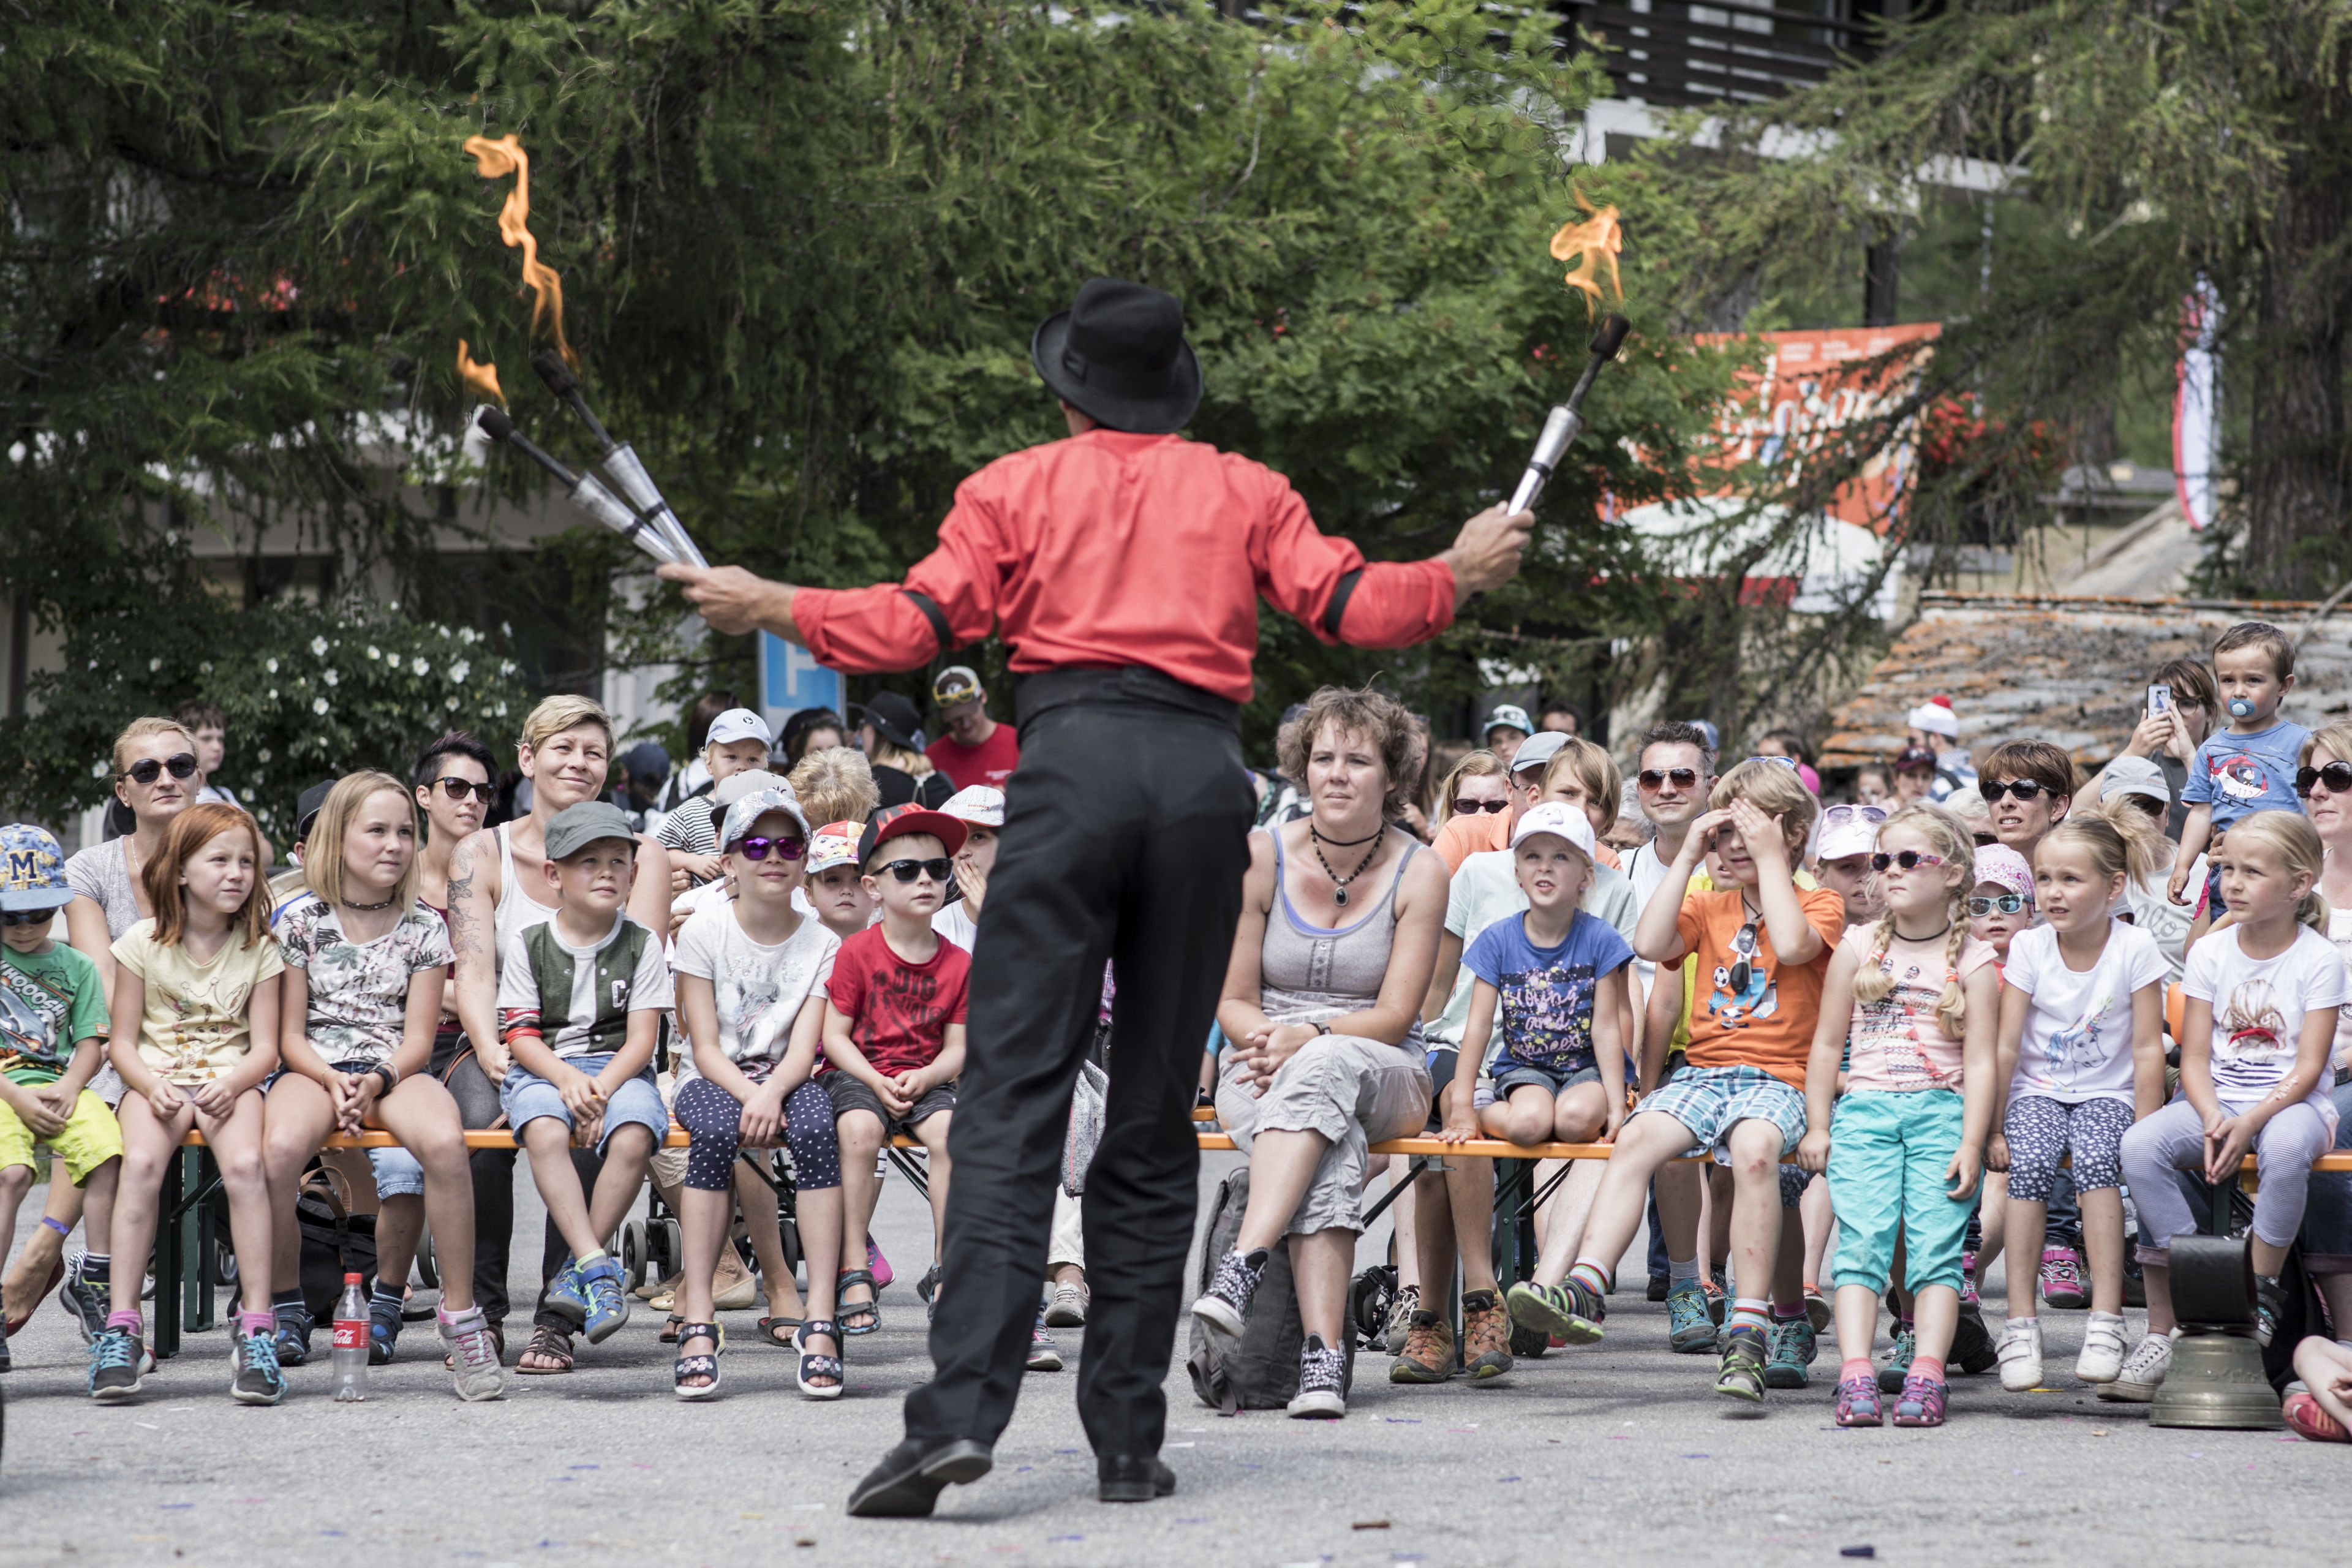 A man juggling in front of an audience at Kids Days, Valais, Switzerland